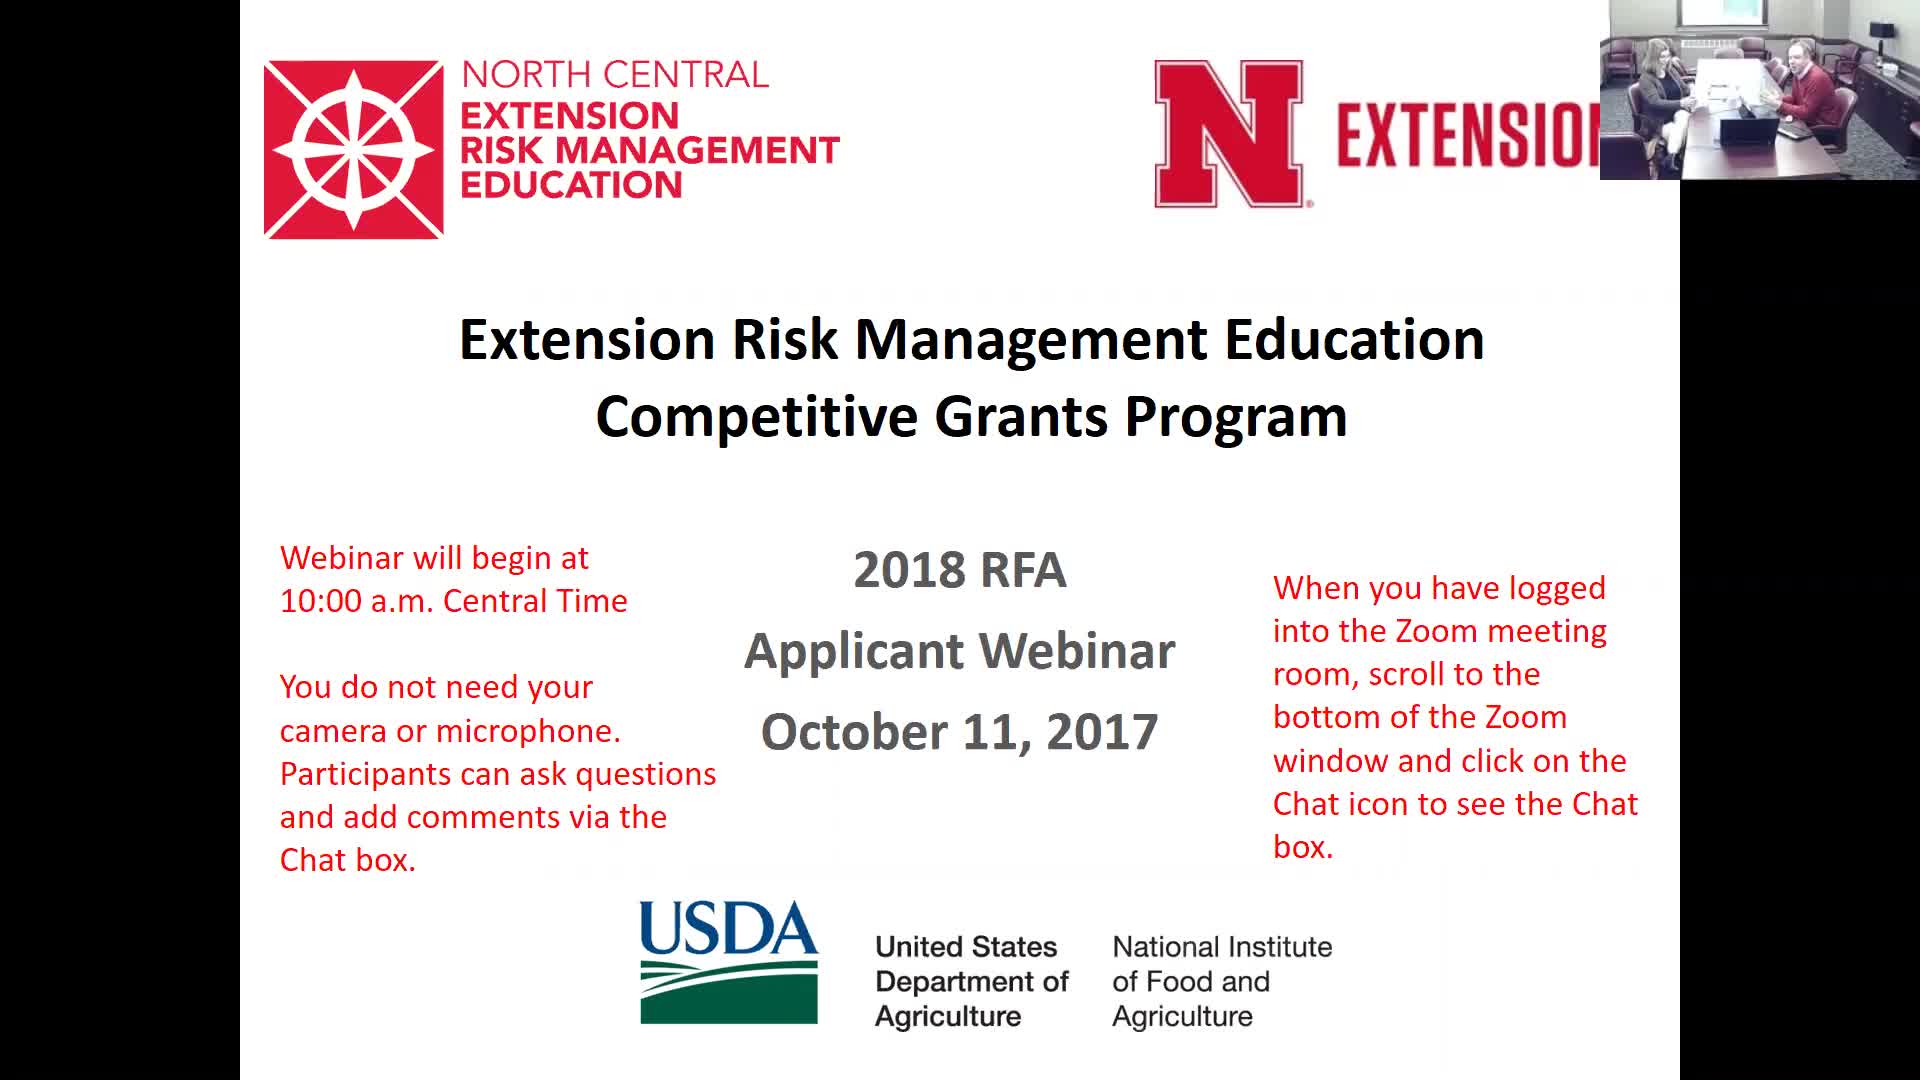 North Central Extension Risk Management Education Center 2018 Applicant Training